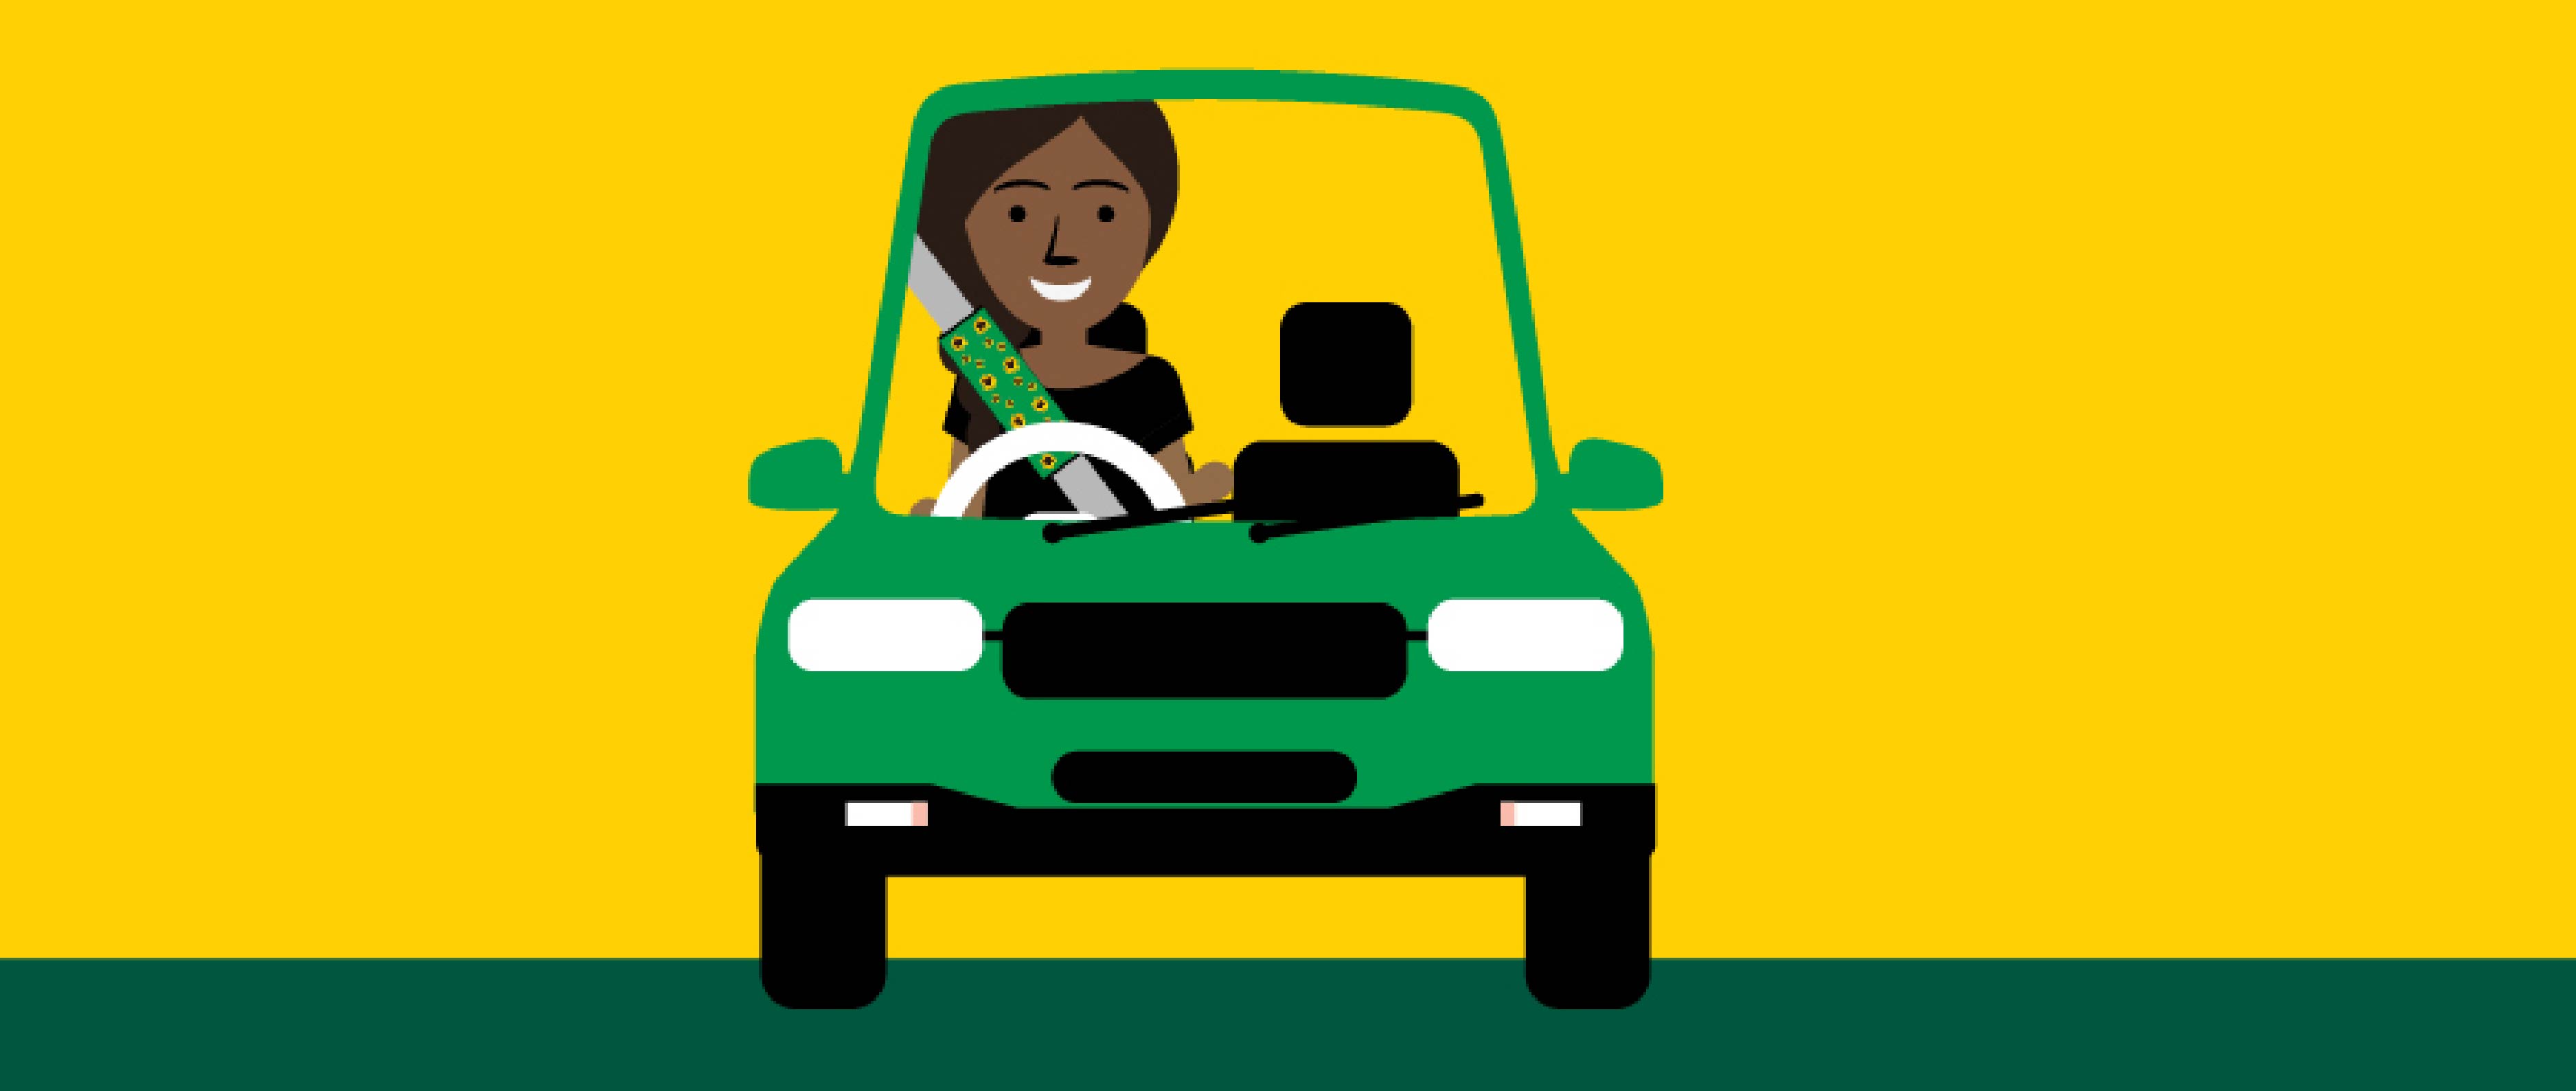 Illustrations of woman icon car wearing a Sunflower seatbelt